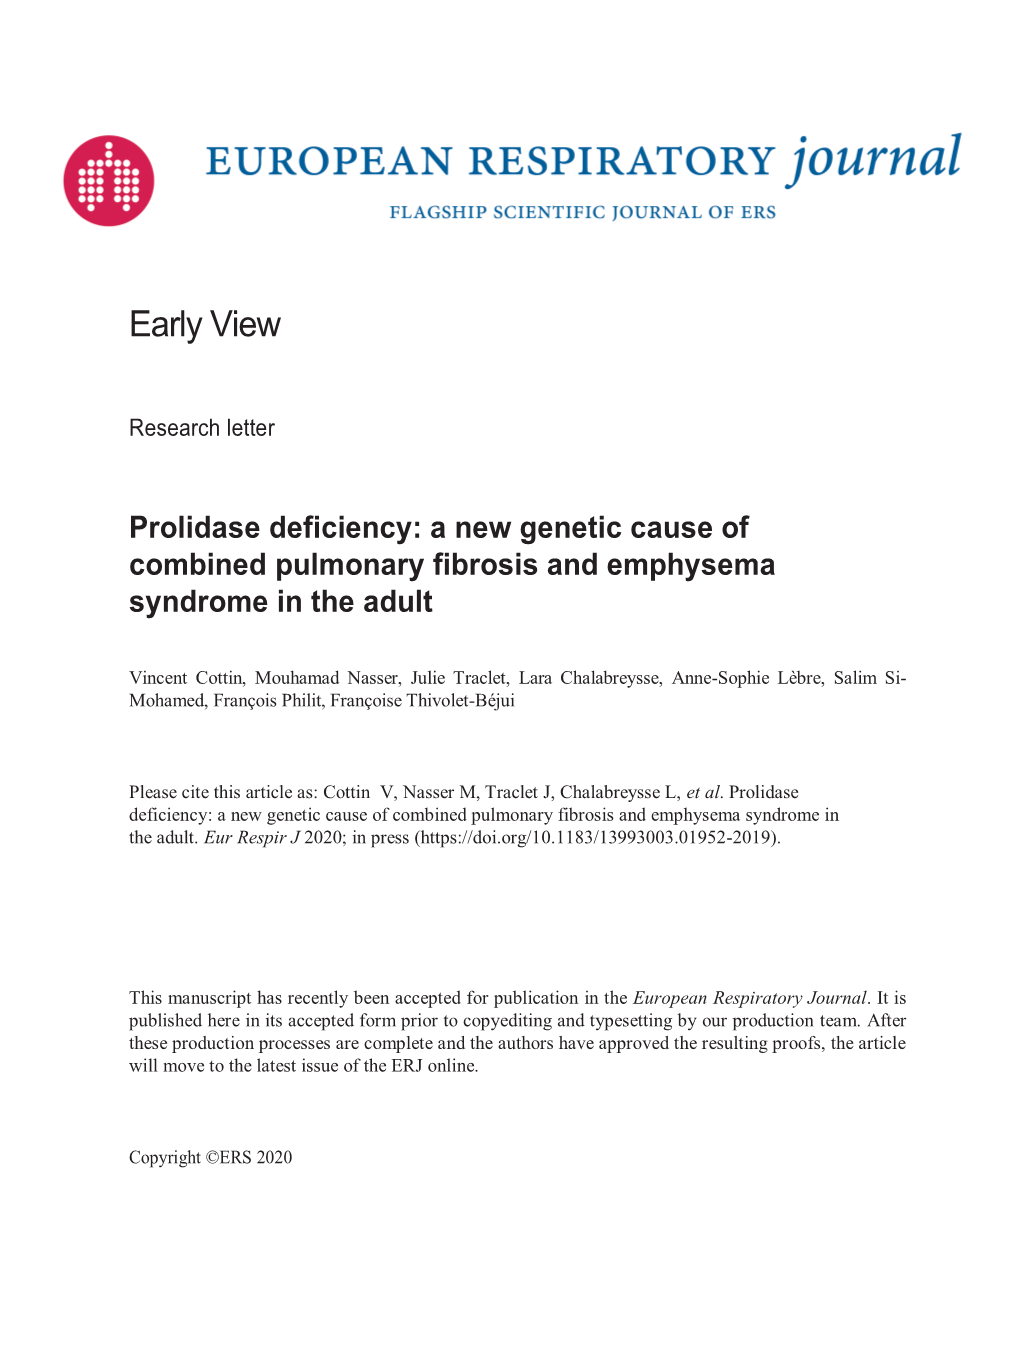 Prolidase Deficiency: a New Genetic Cause of Combined Pulmonary Fibrosis and Emphysema Syndrome in the Adult